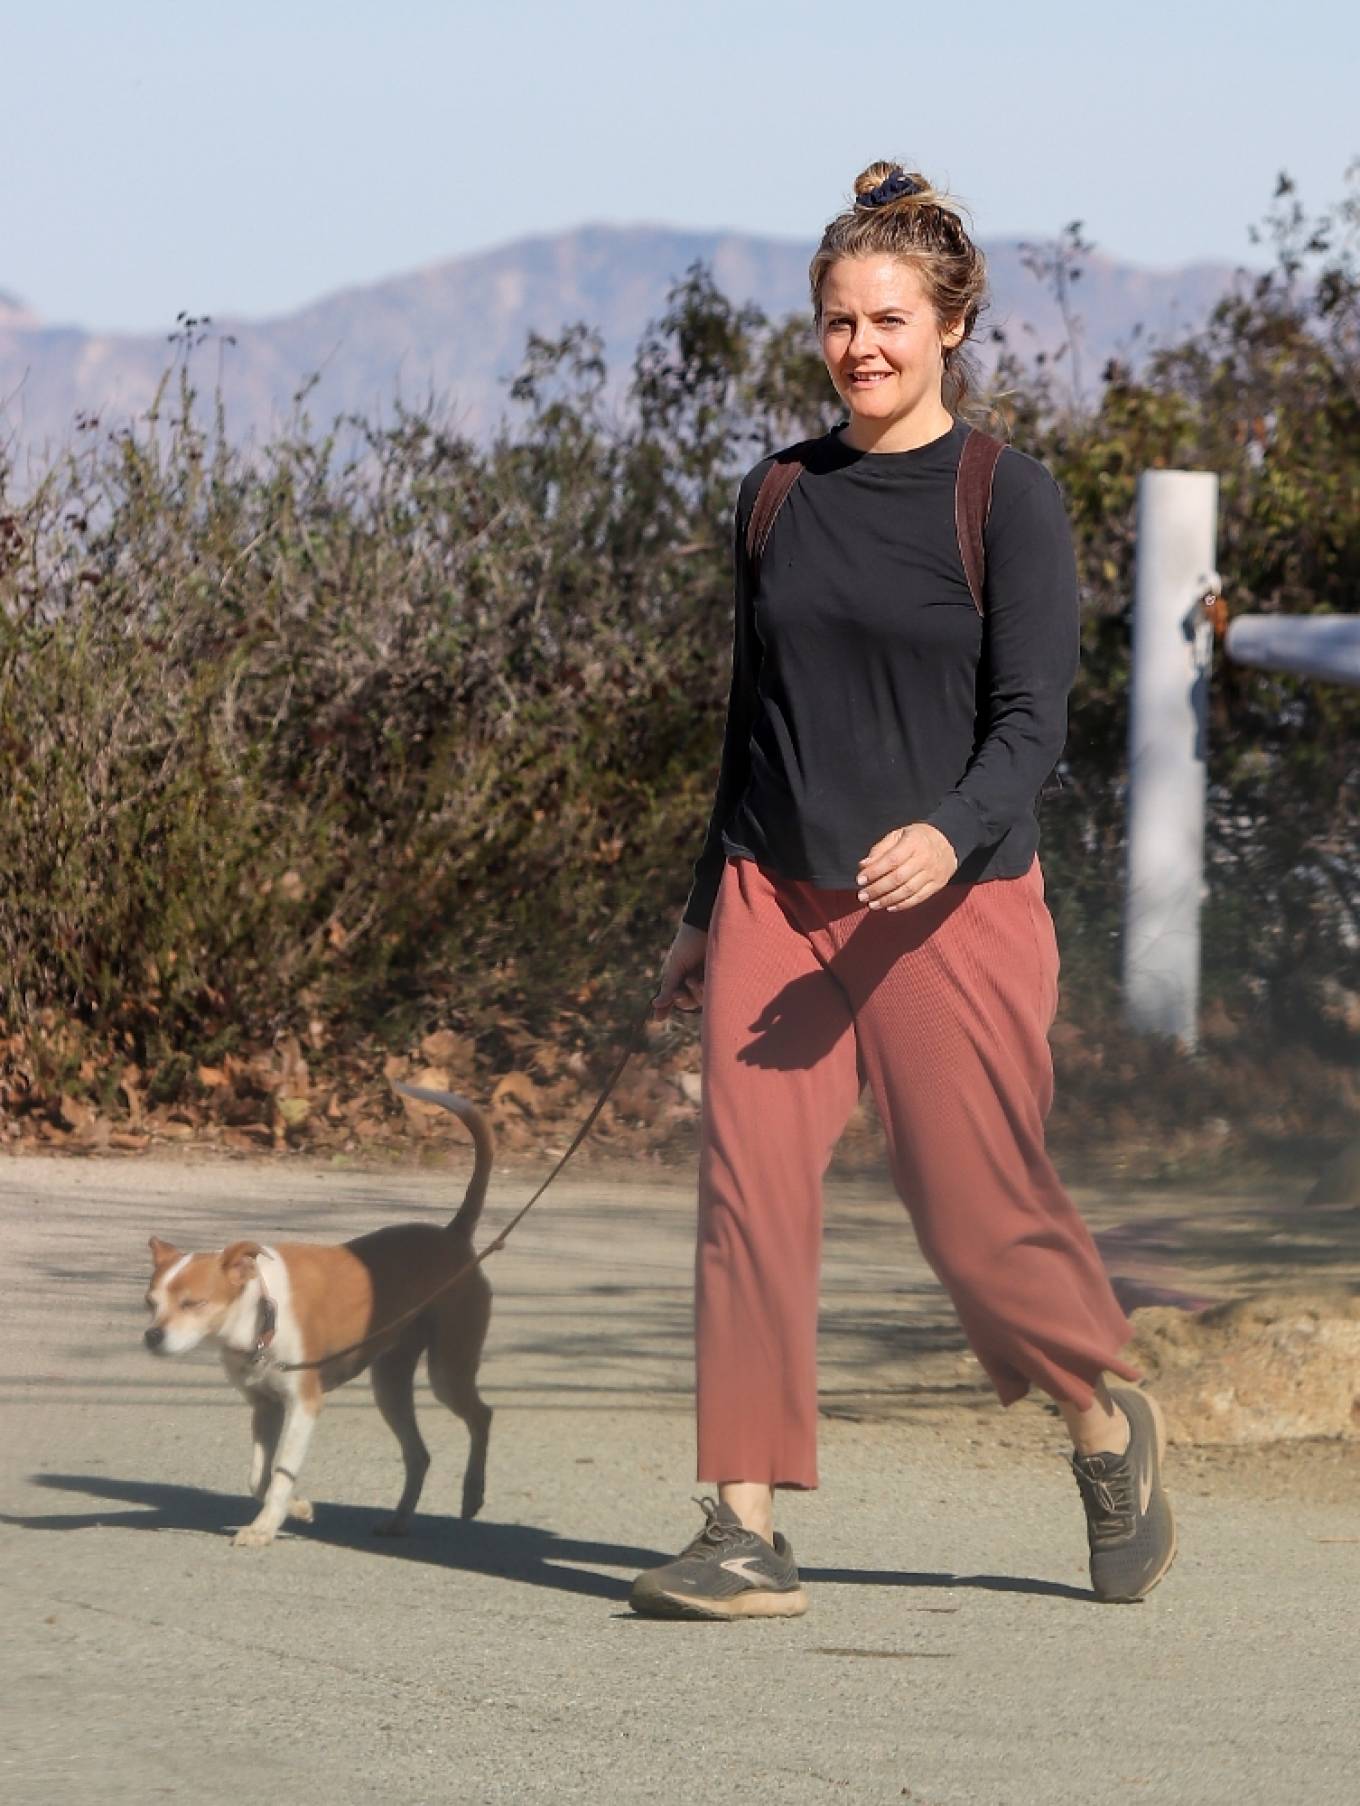 Alicia Silverstone 2021 : Alicia Silverstone – Seen while takes her dog for a walk-01